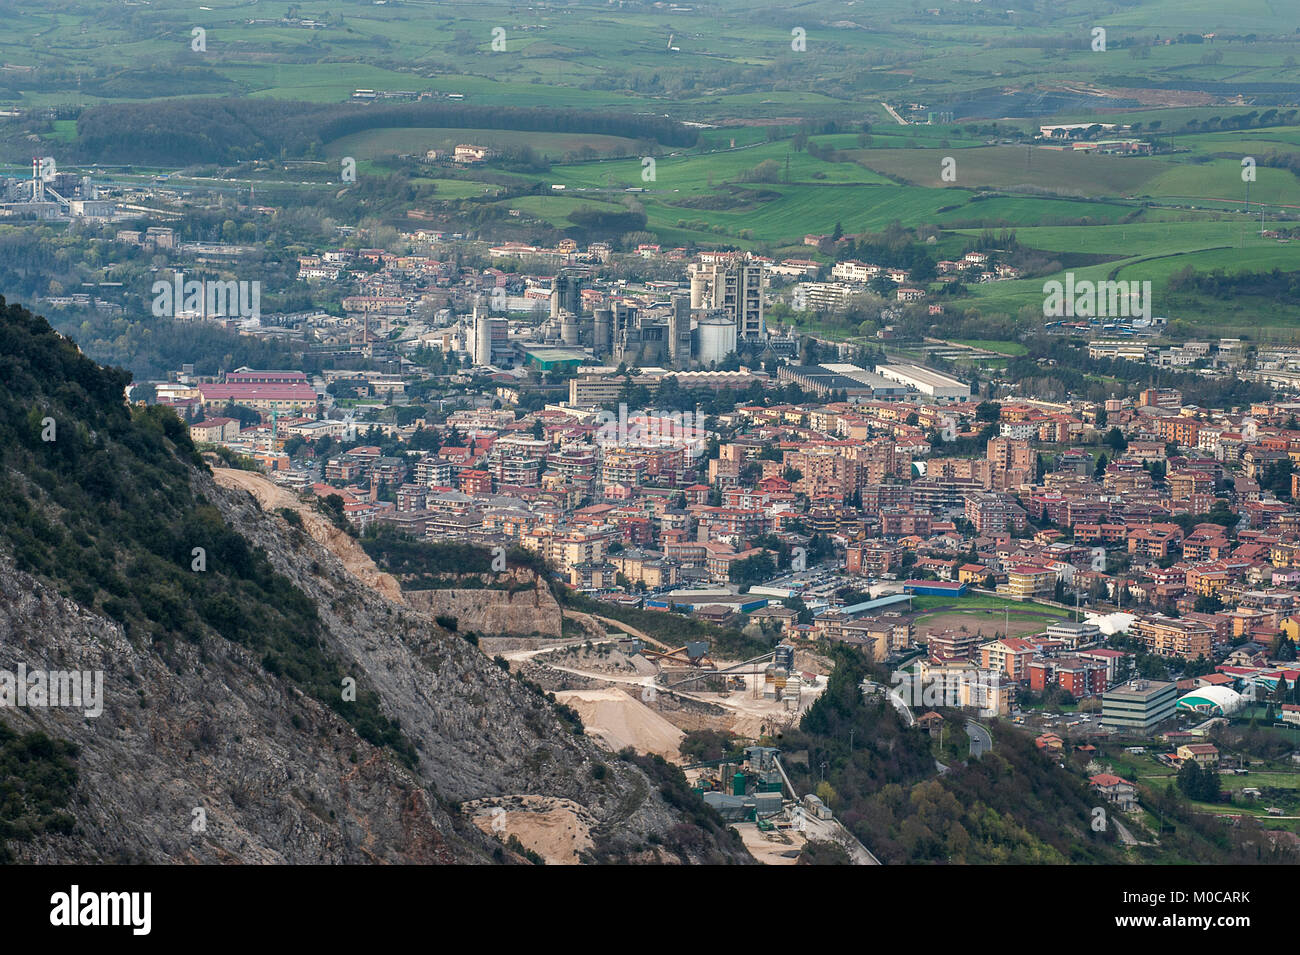 Aerial view of Colleferro, one of the most polluted cities in Italy Stock Photo